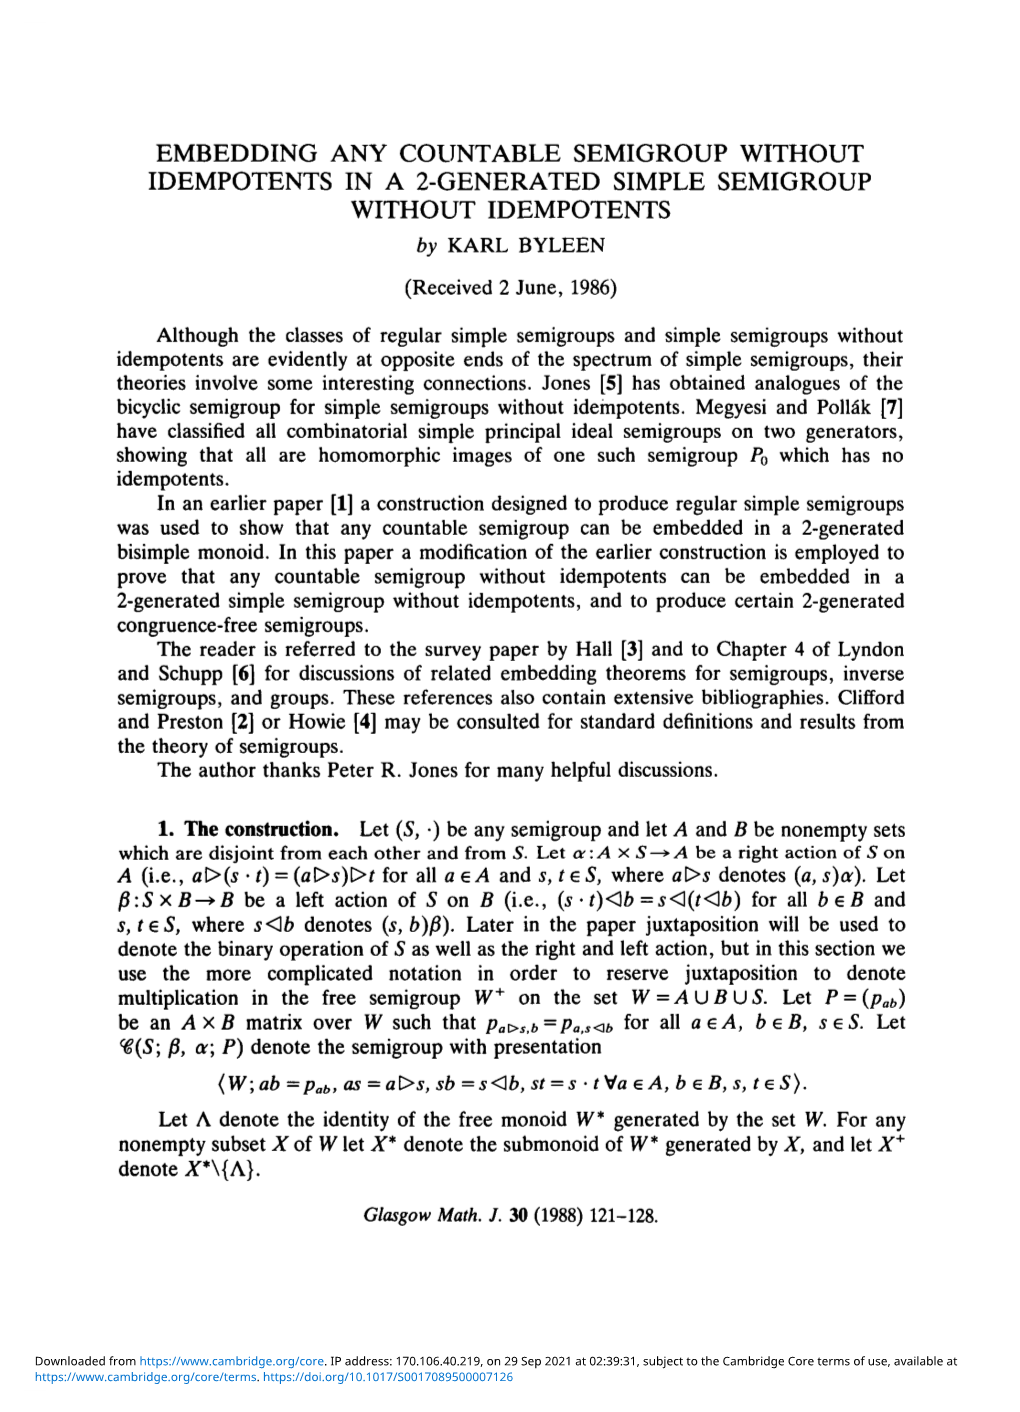 EMBEDDING ANY COUNTABLE SEMIGROUP WITHOUT IDEMPOTENTS in a 2-GENERATED SIMPLE SEMIGROUP WITHOUT IDEMPOTENTS by KARL BYLEEN (Received 2 June, 1986)